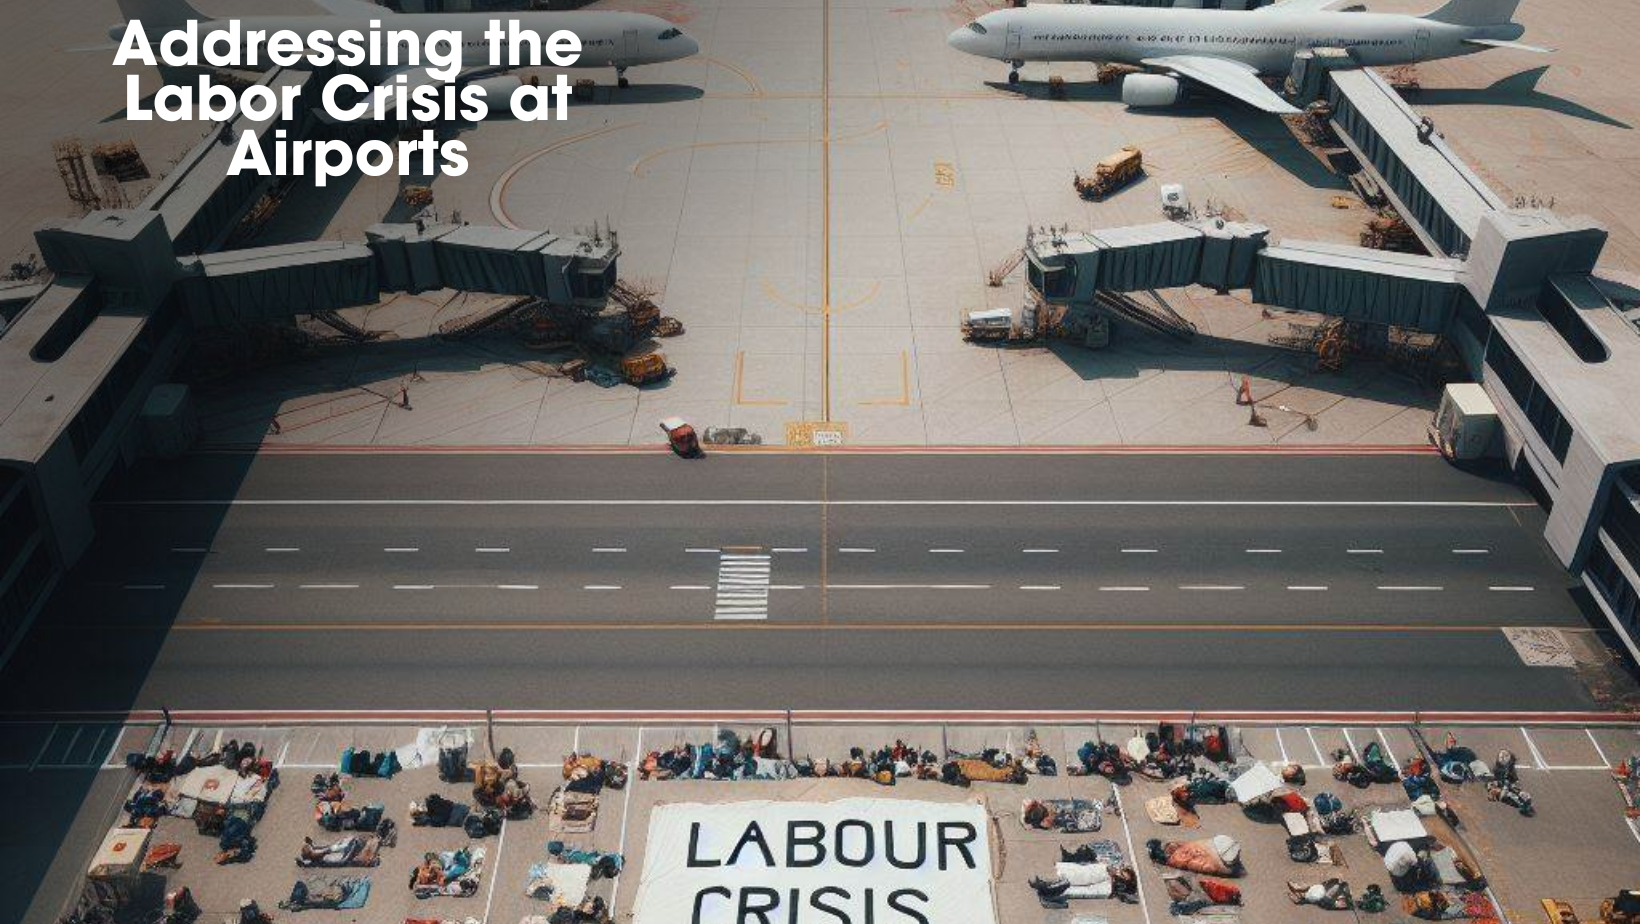 Addressing the Labor Crisis at Airports